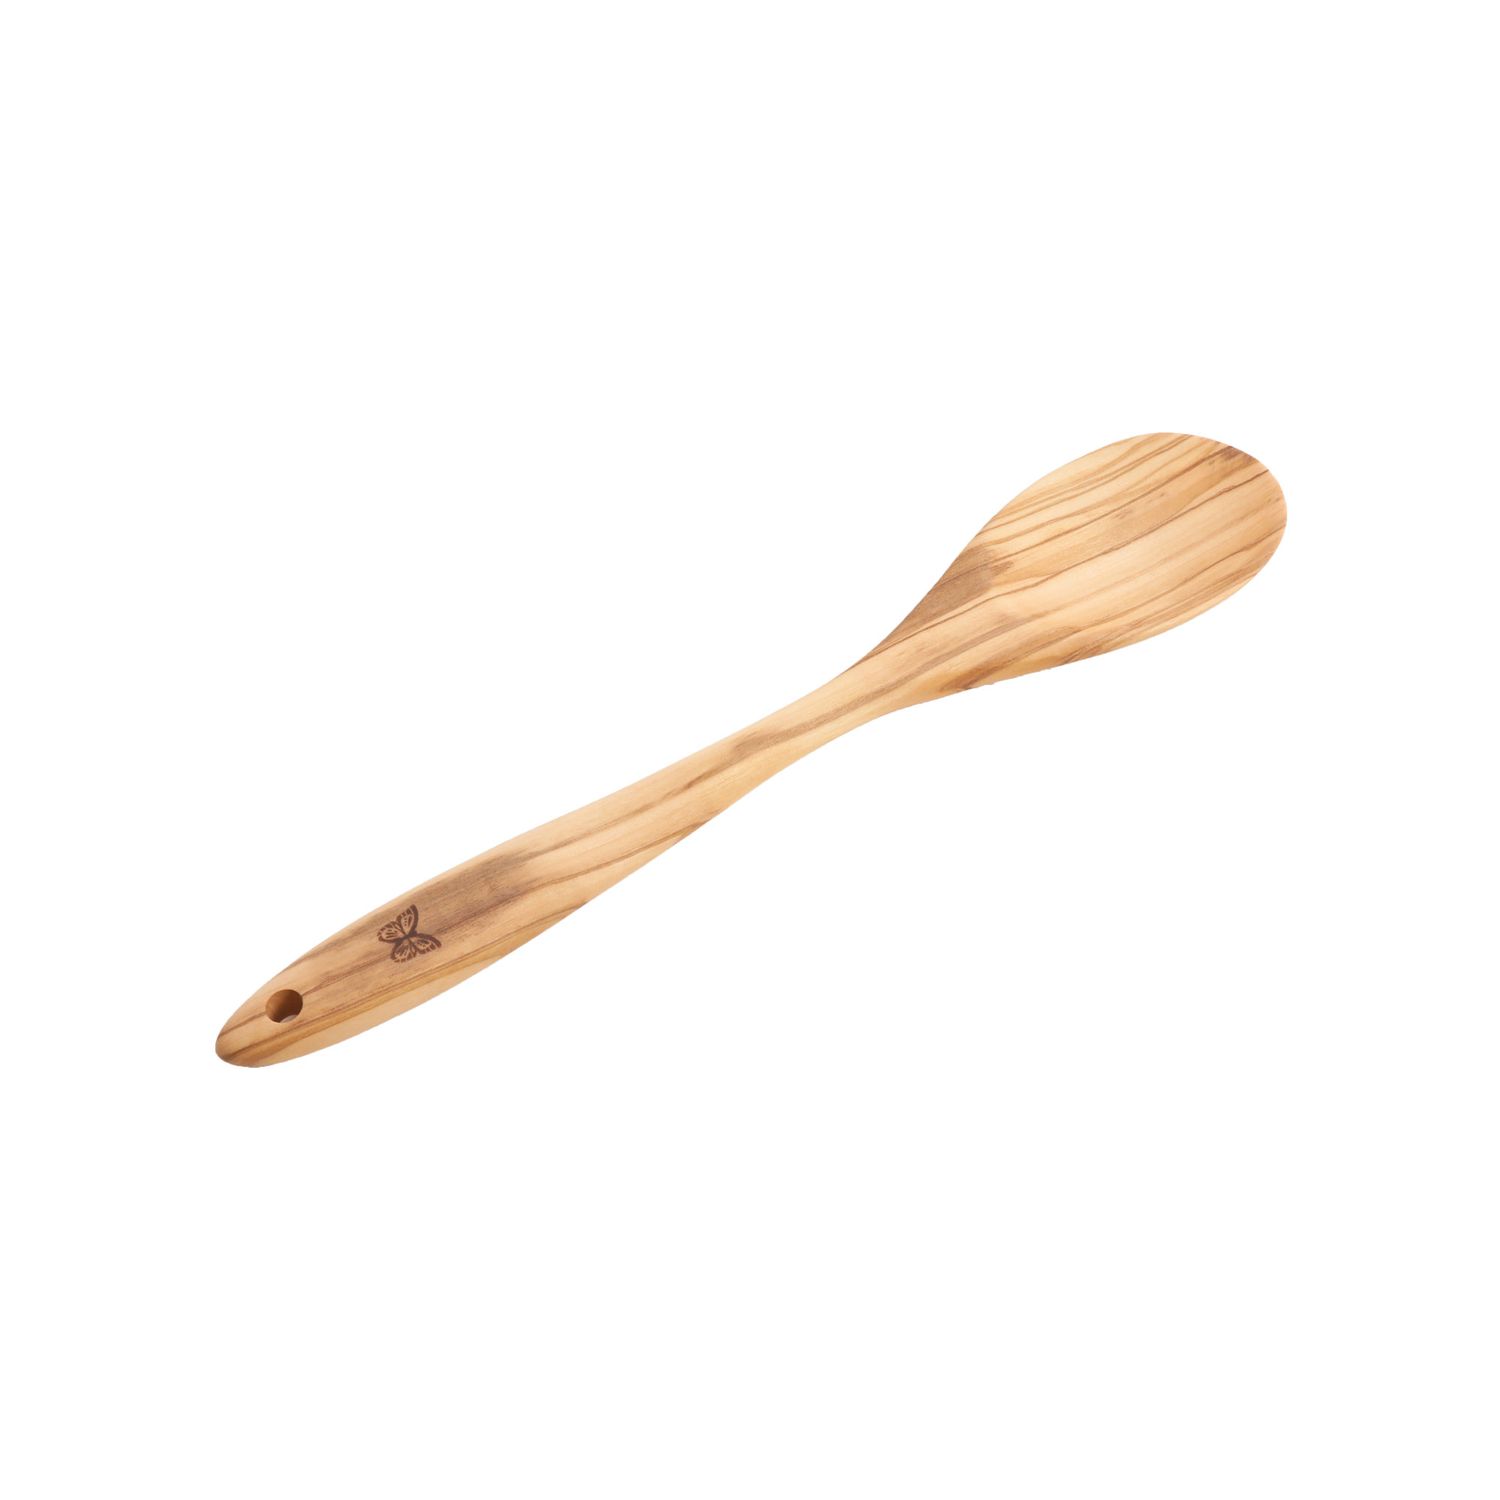 wooden spoon on a white background